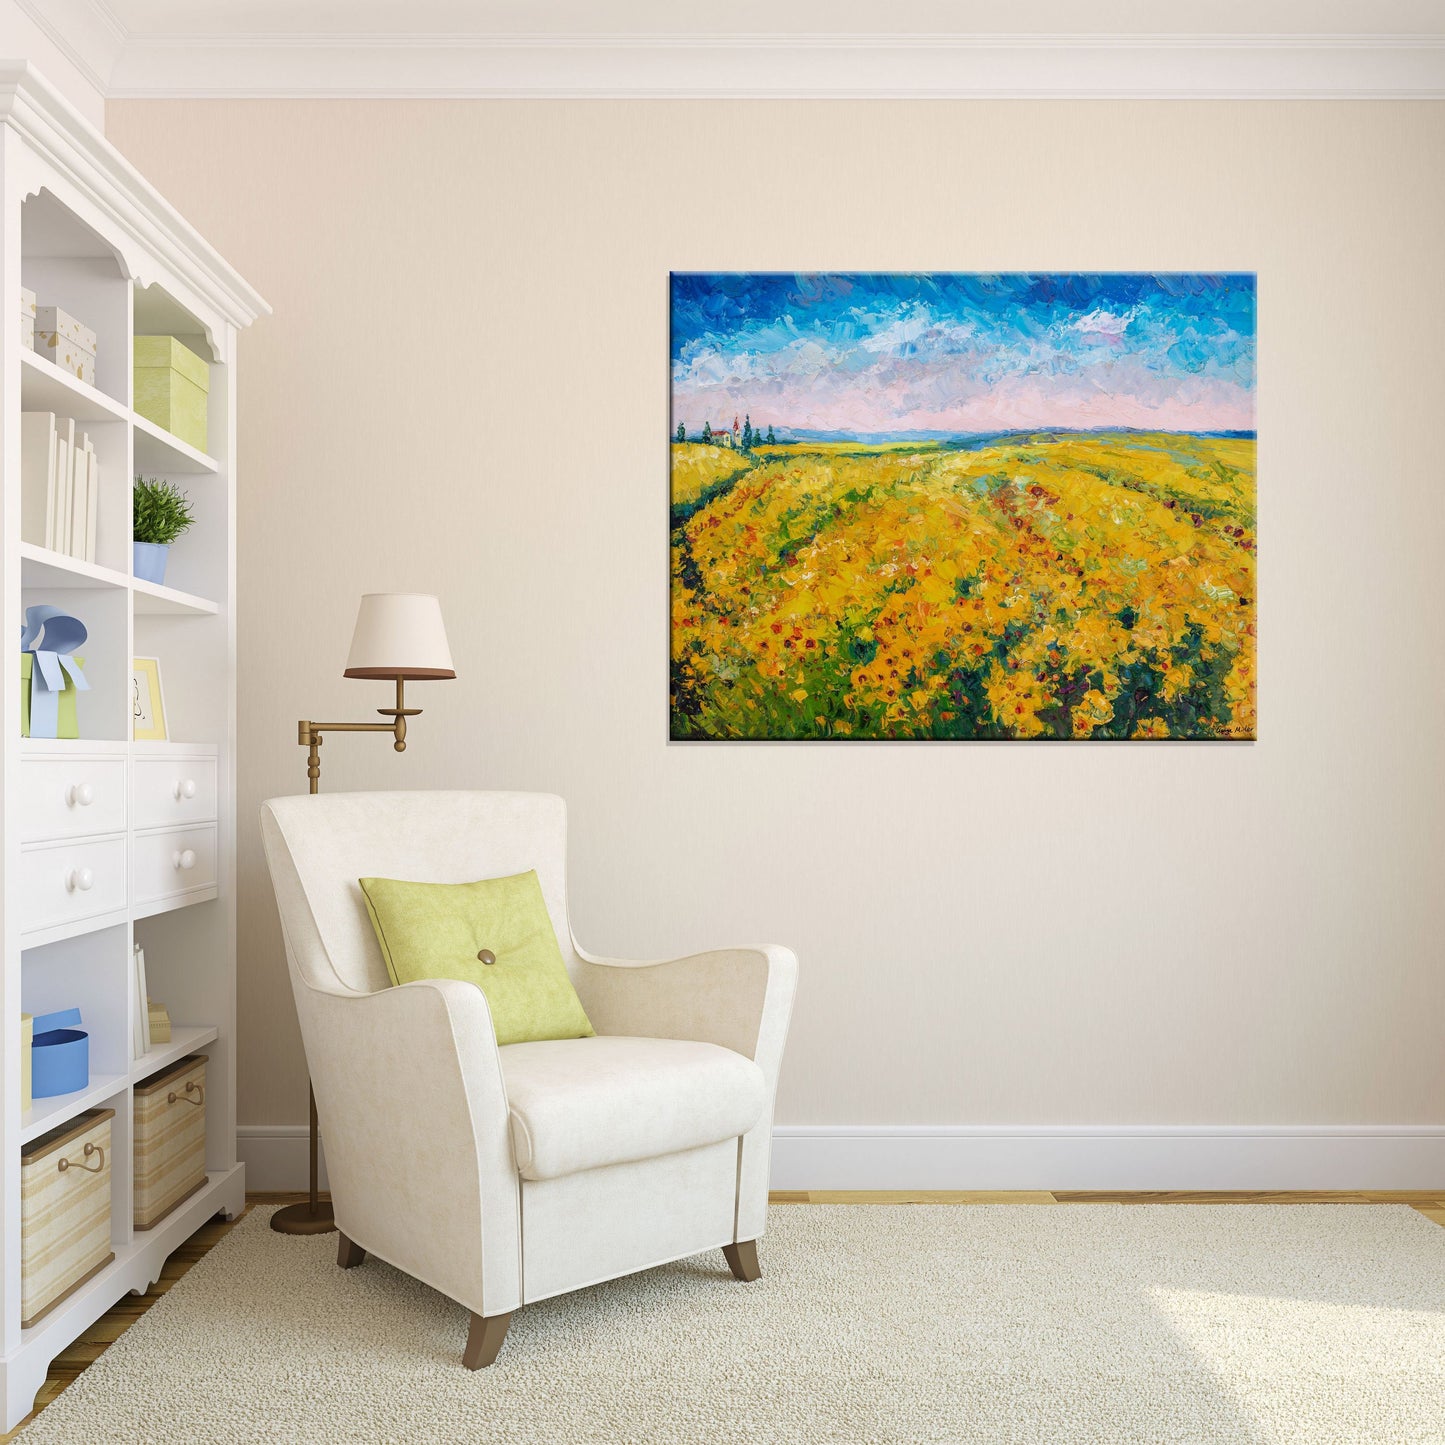 Oil Painting, Italian Tuscany Landscape Painting, Sunflower Fields, Palette Knife Art, Oil Painting Abstract, Rustic Living Room Wall Art